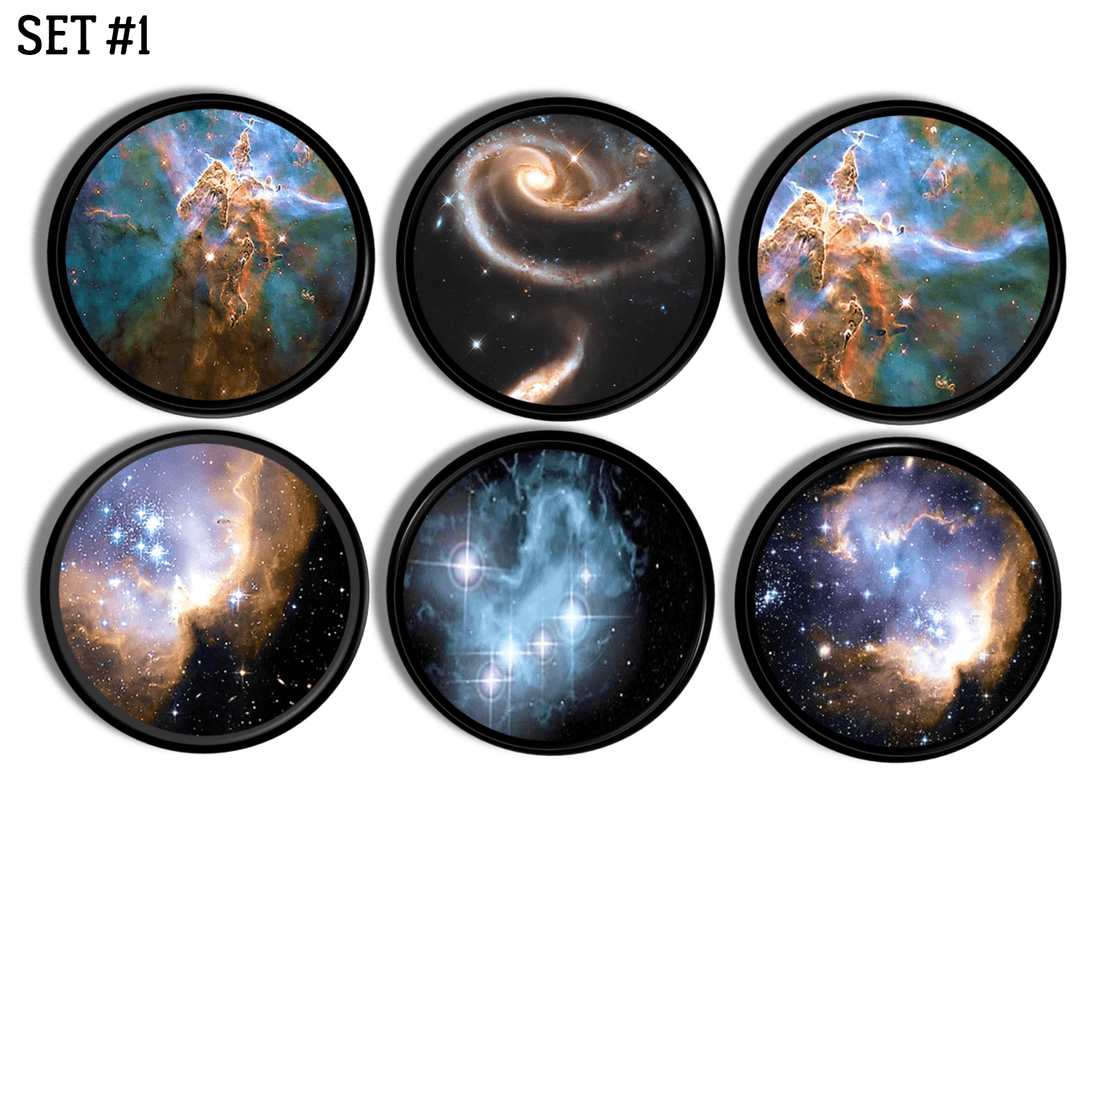 Nebulous stars in blues, purples gold and pink clusters outer space decor dresser knobs